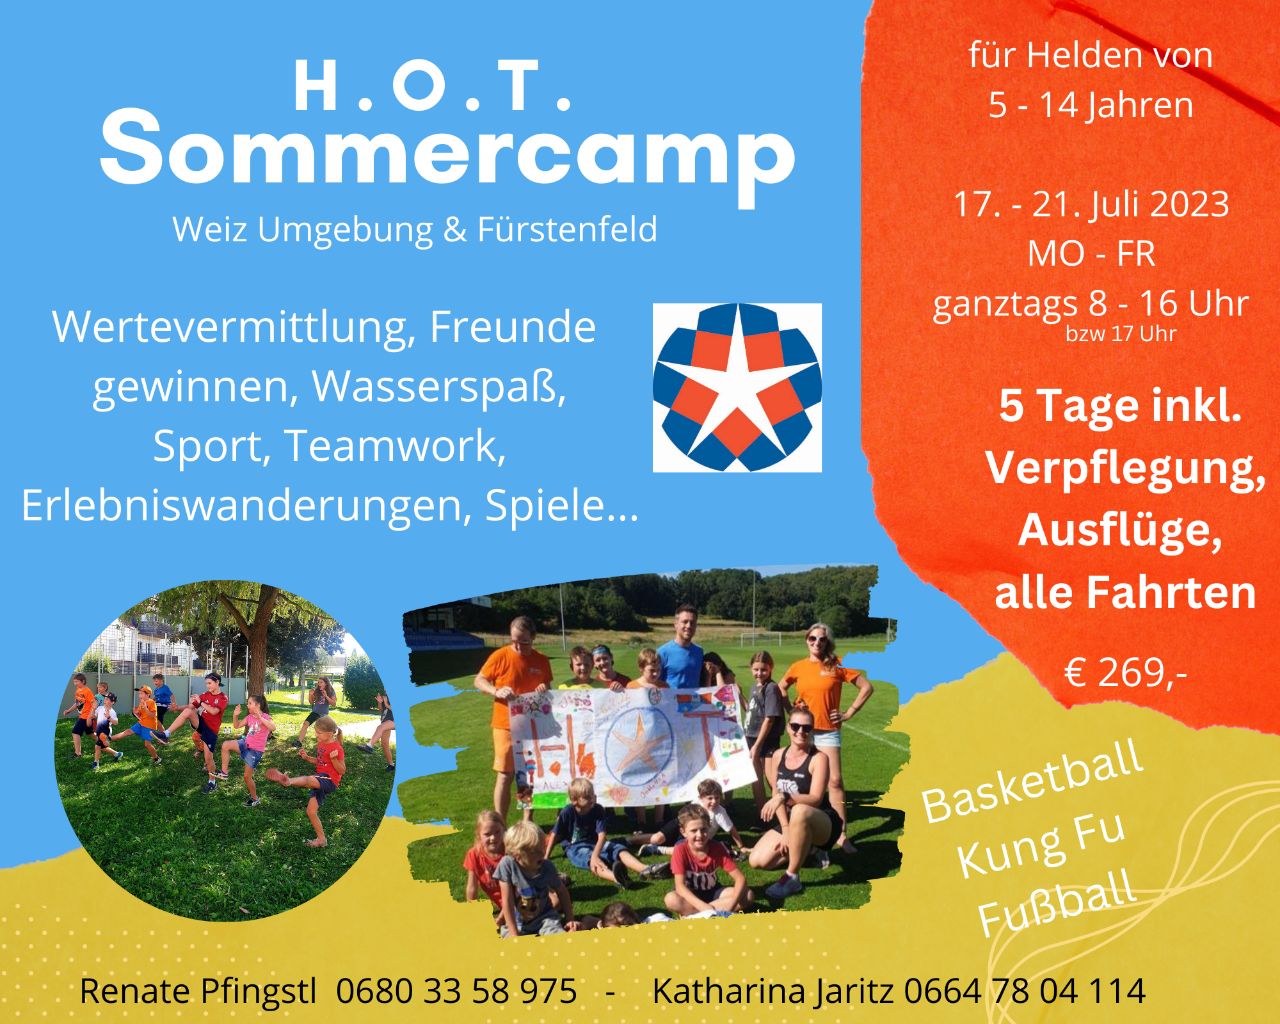 H.O.T. Sommercamp 2023